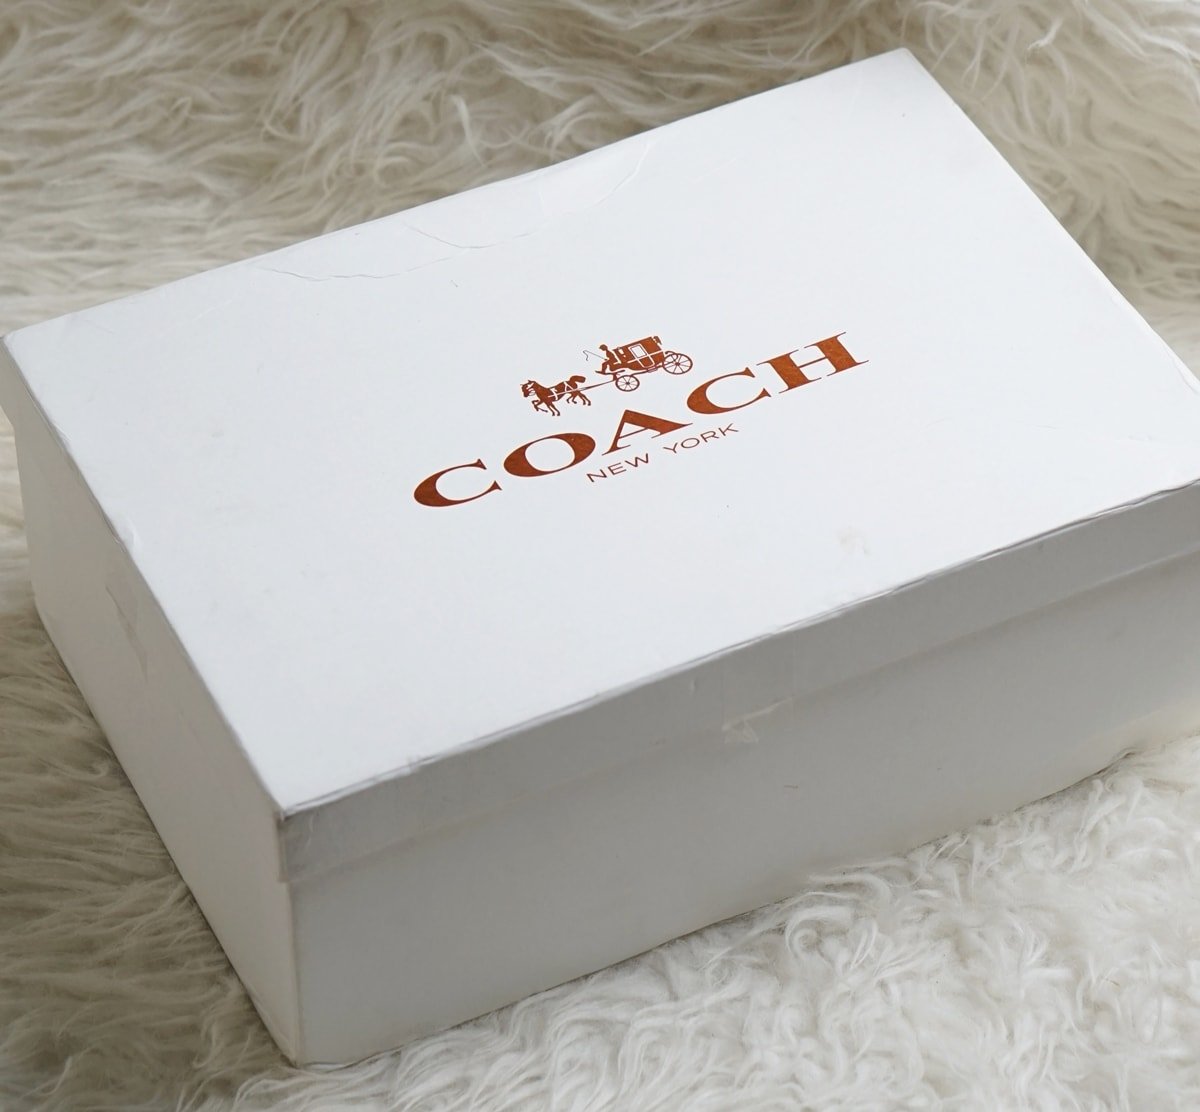 White Coach gift box with the iconic horse and carriage logo